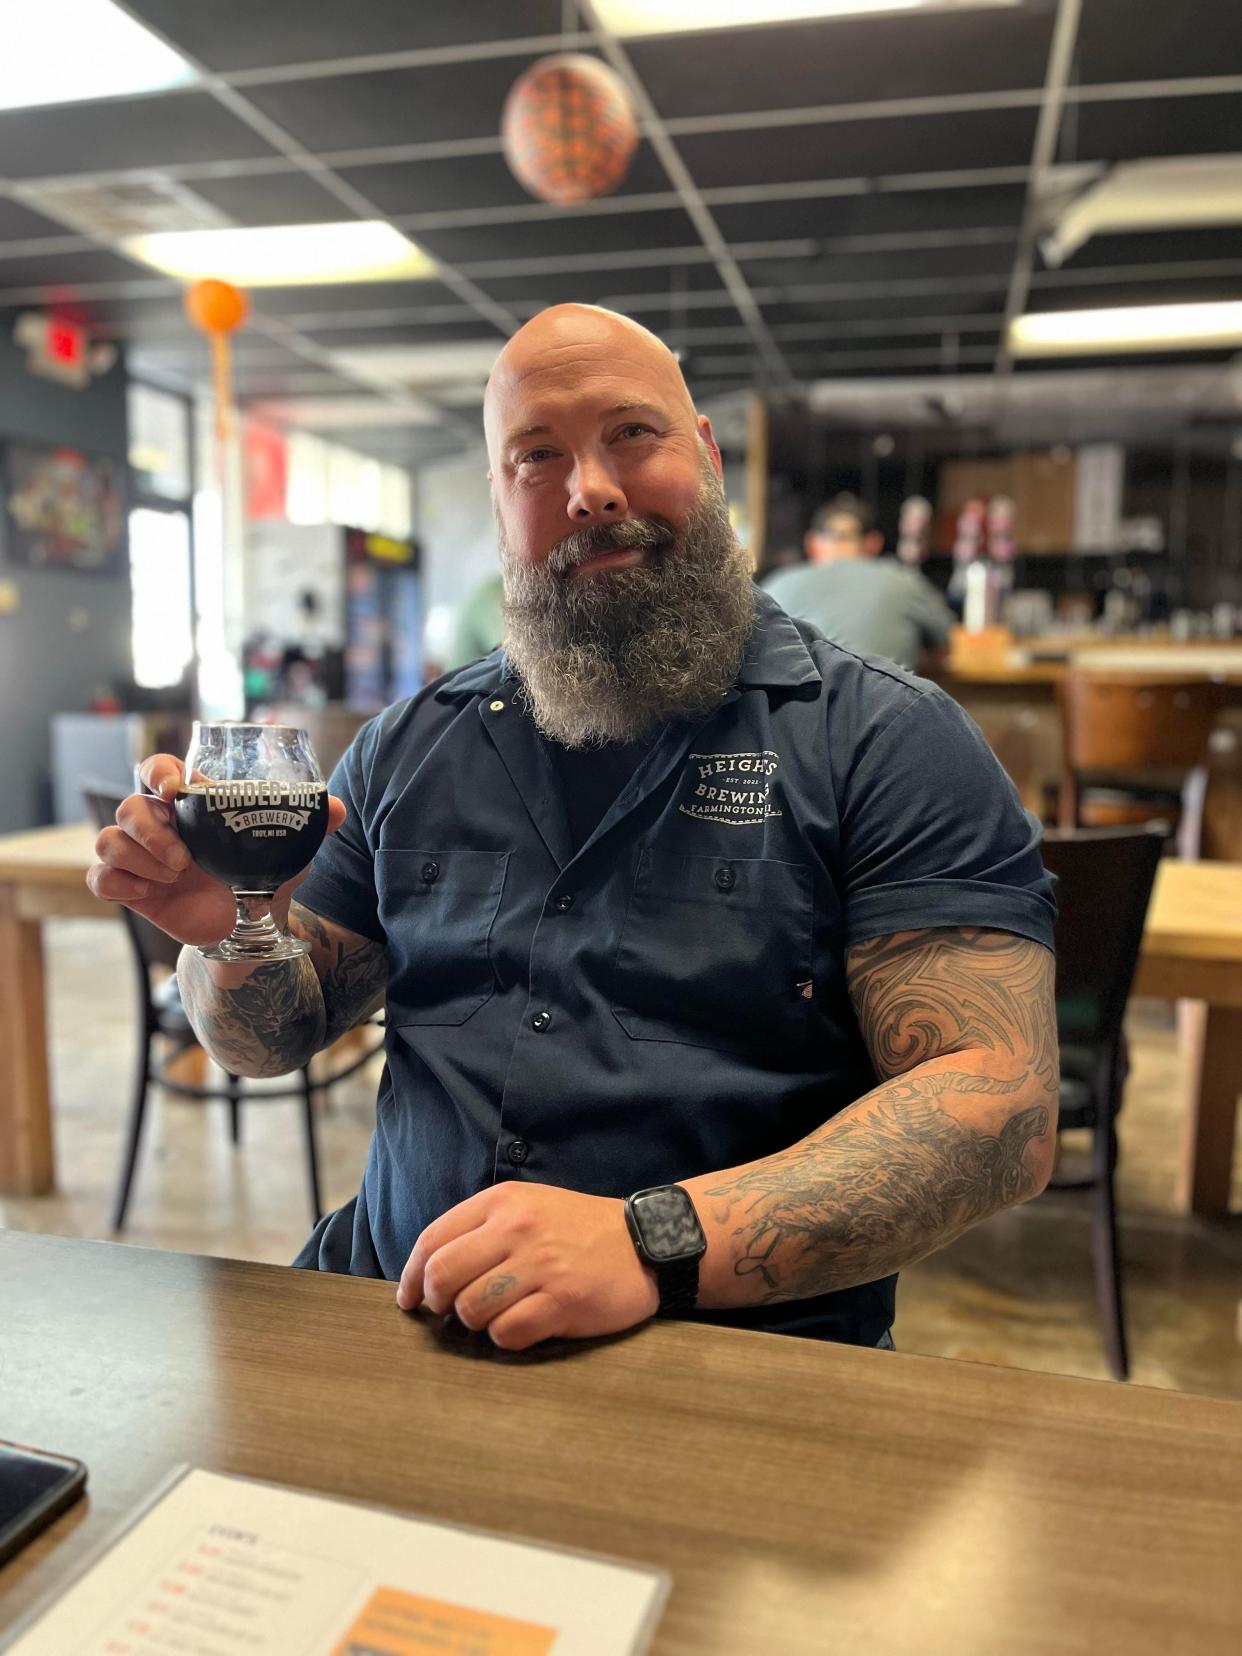 Ryan Kavanagh, co-founder of Heights Brewing in Farmington, holding a glass of Vor's Gone Phishing, a beer collaboration with Loaded Dice Brewery.